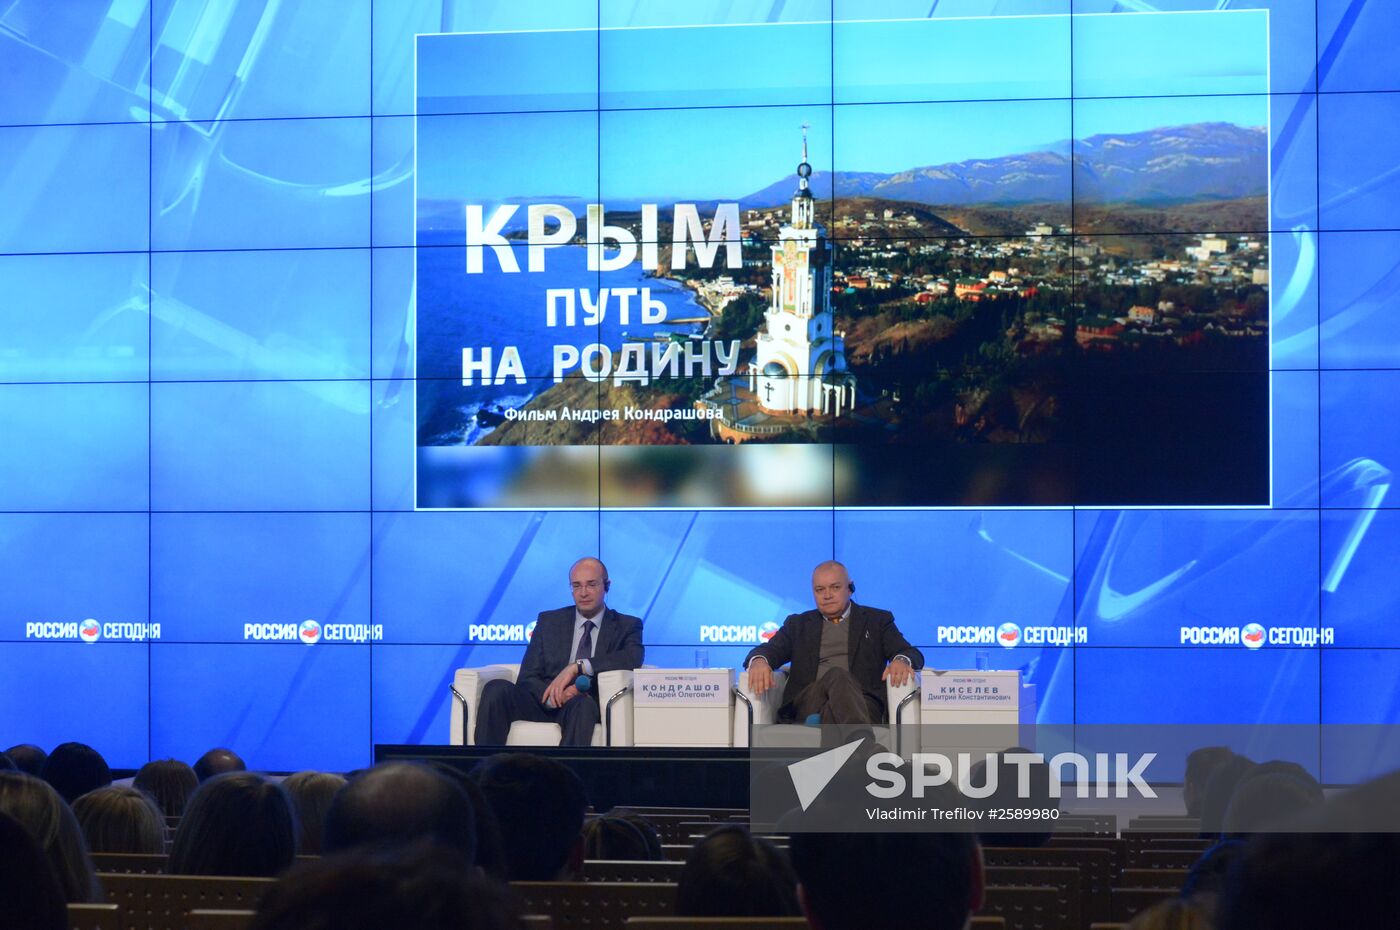 News conference on the special screening of the film 'Crimea: The Way Home'